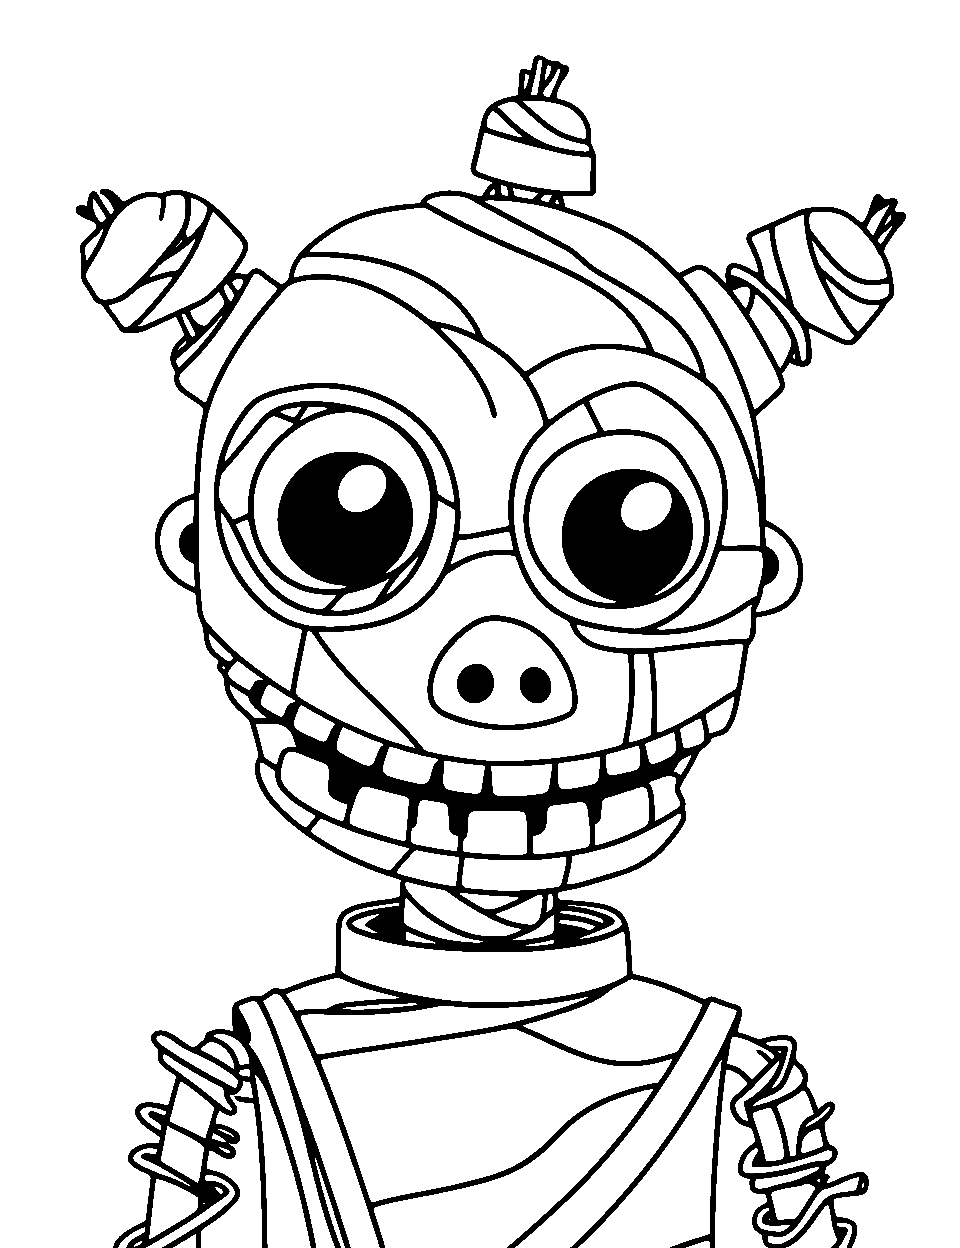 Five Nights At Freddys Coloring Pages Springtrap - Free Coloring Sheets